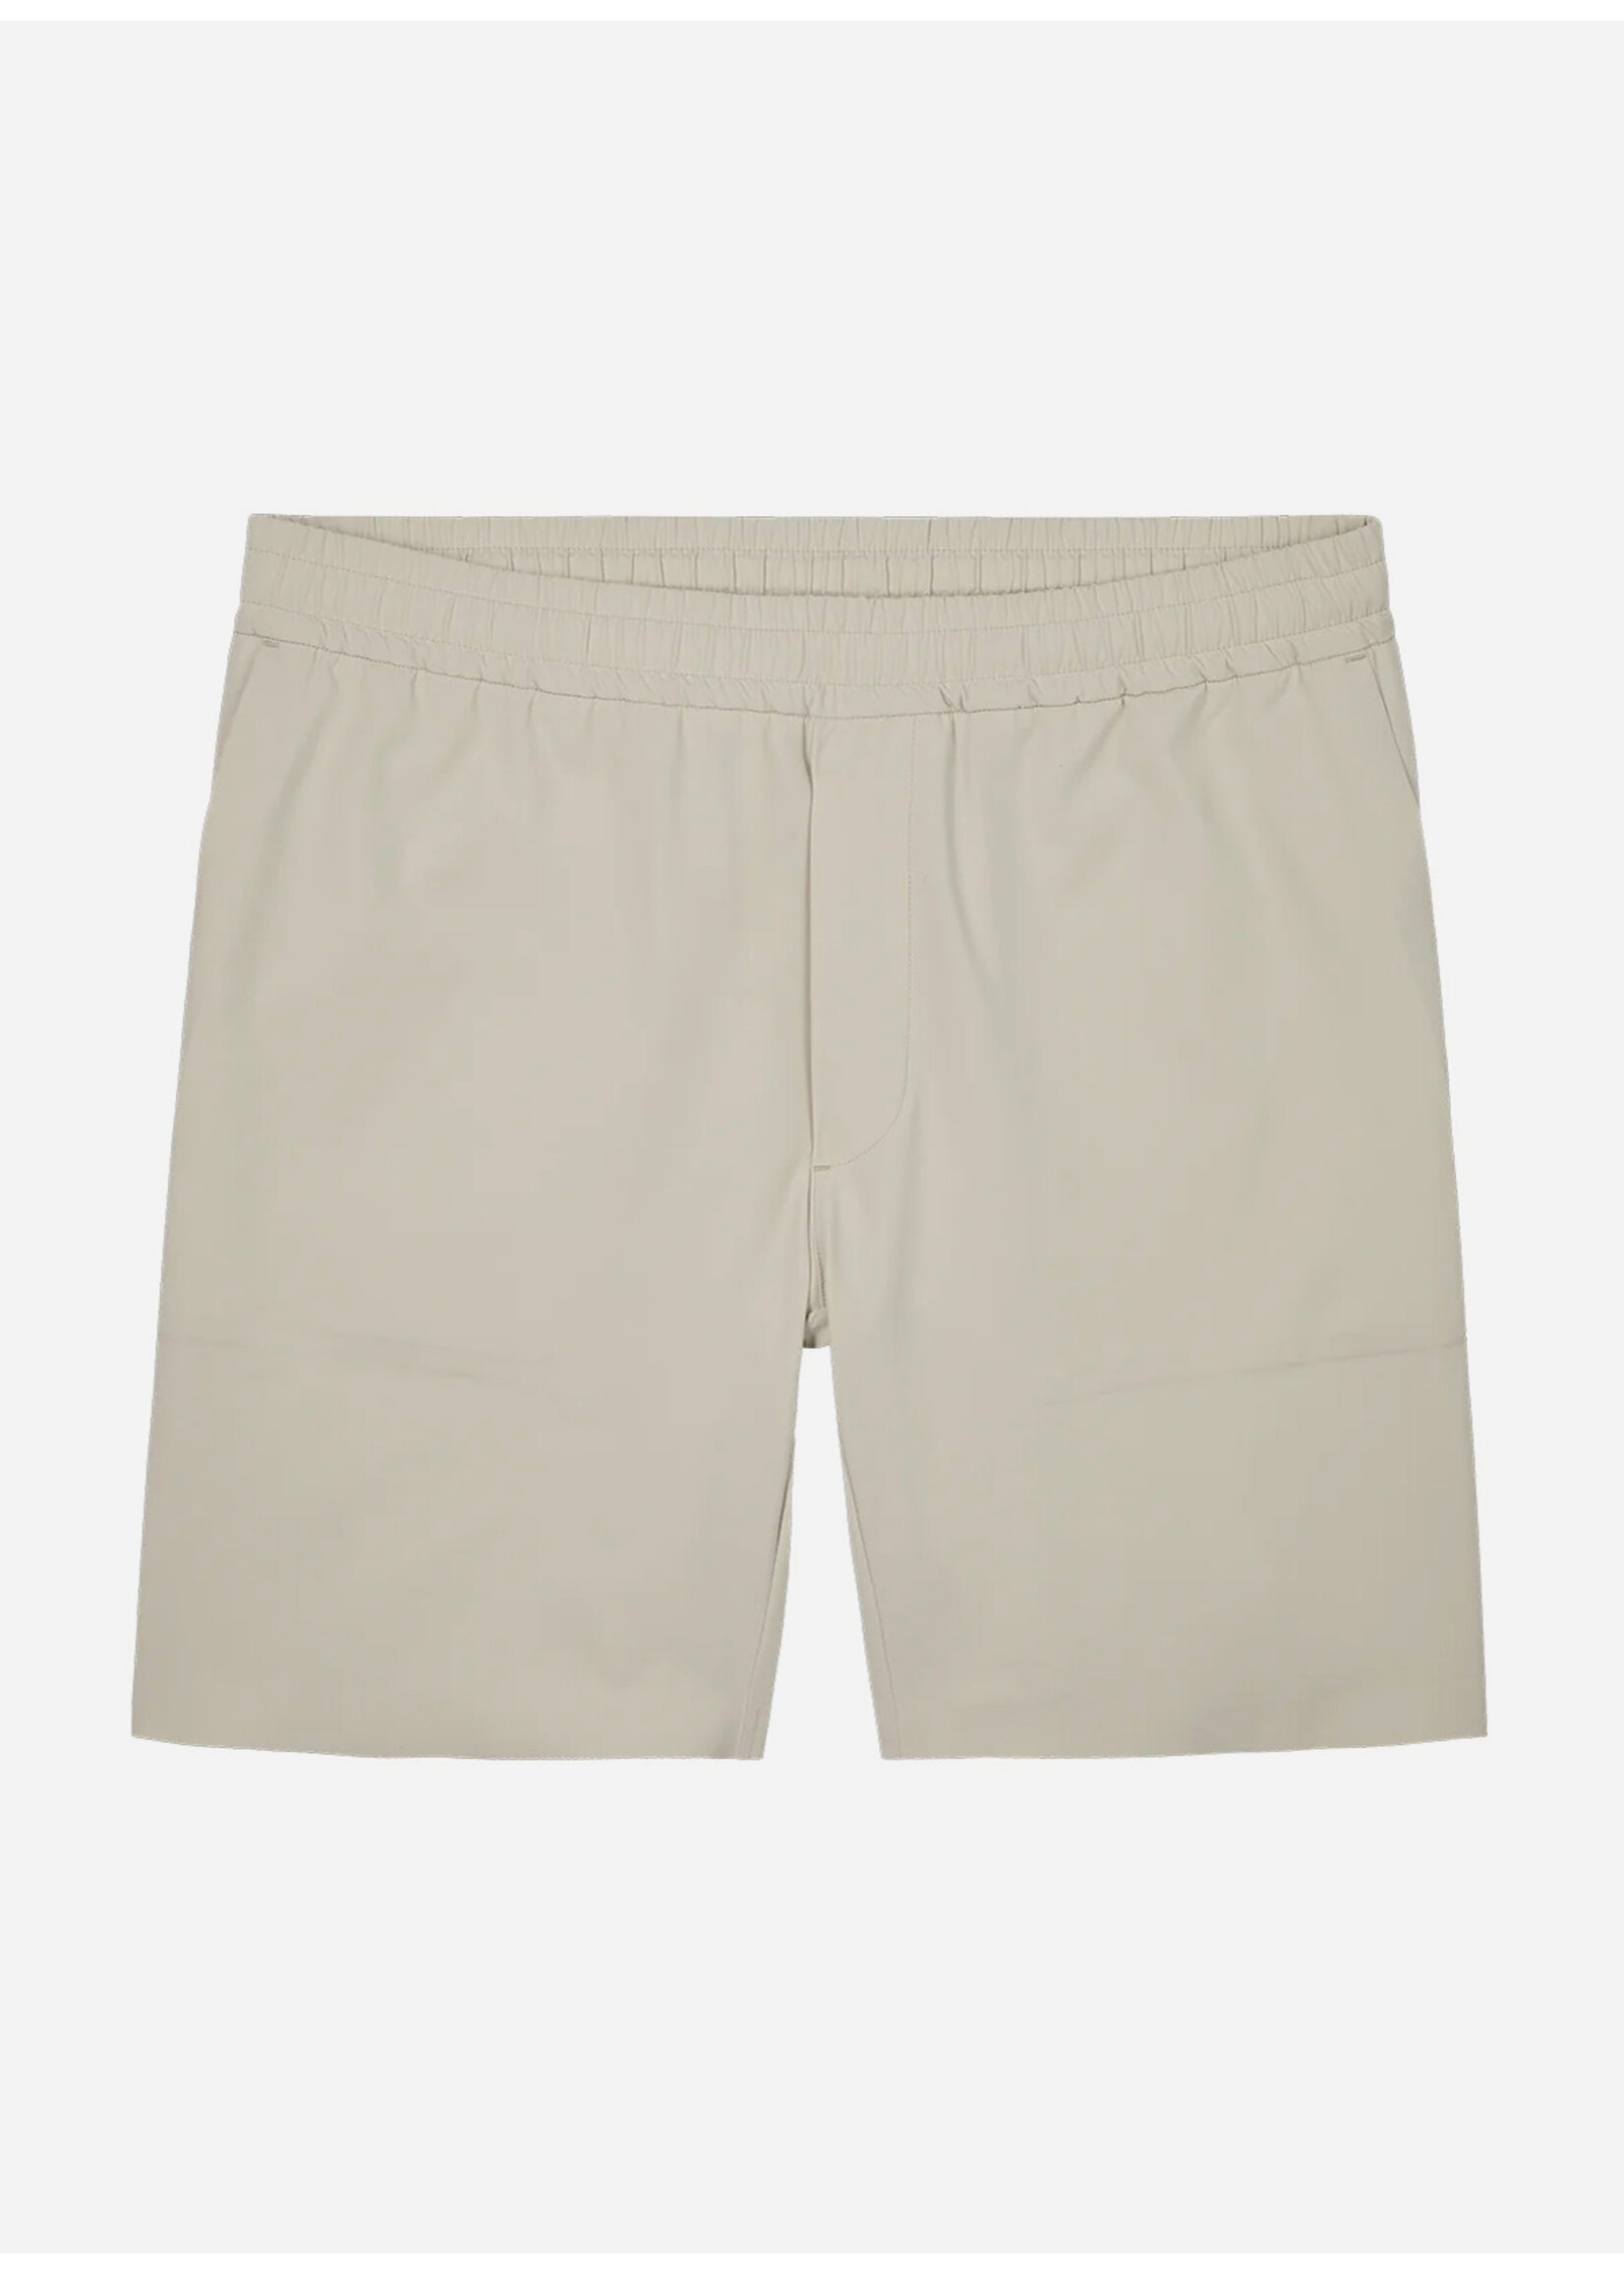 Wahts Ross Cross Sports Shorts White Sand